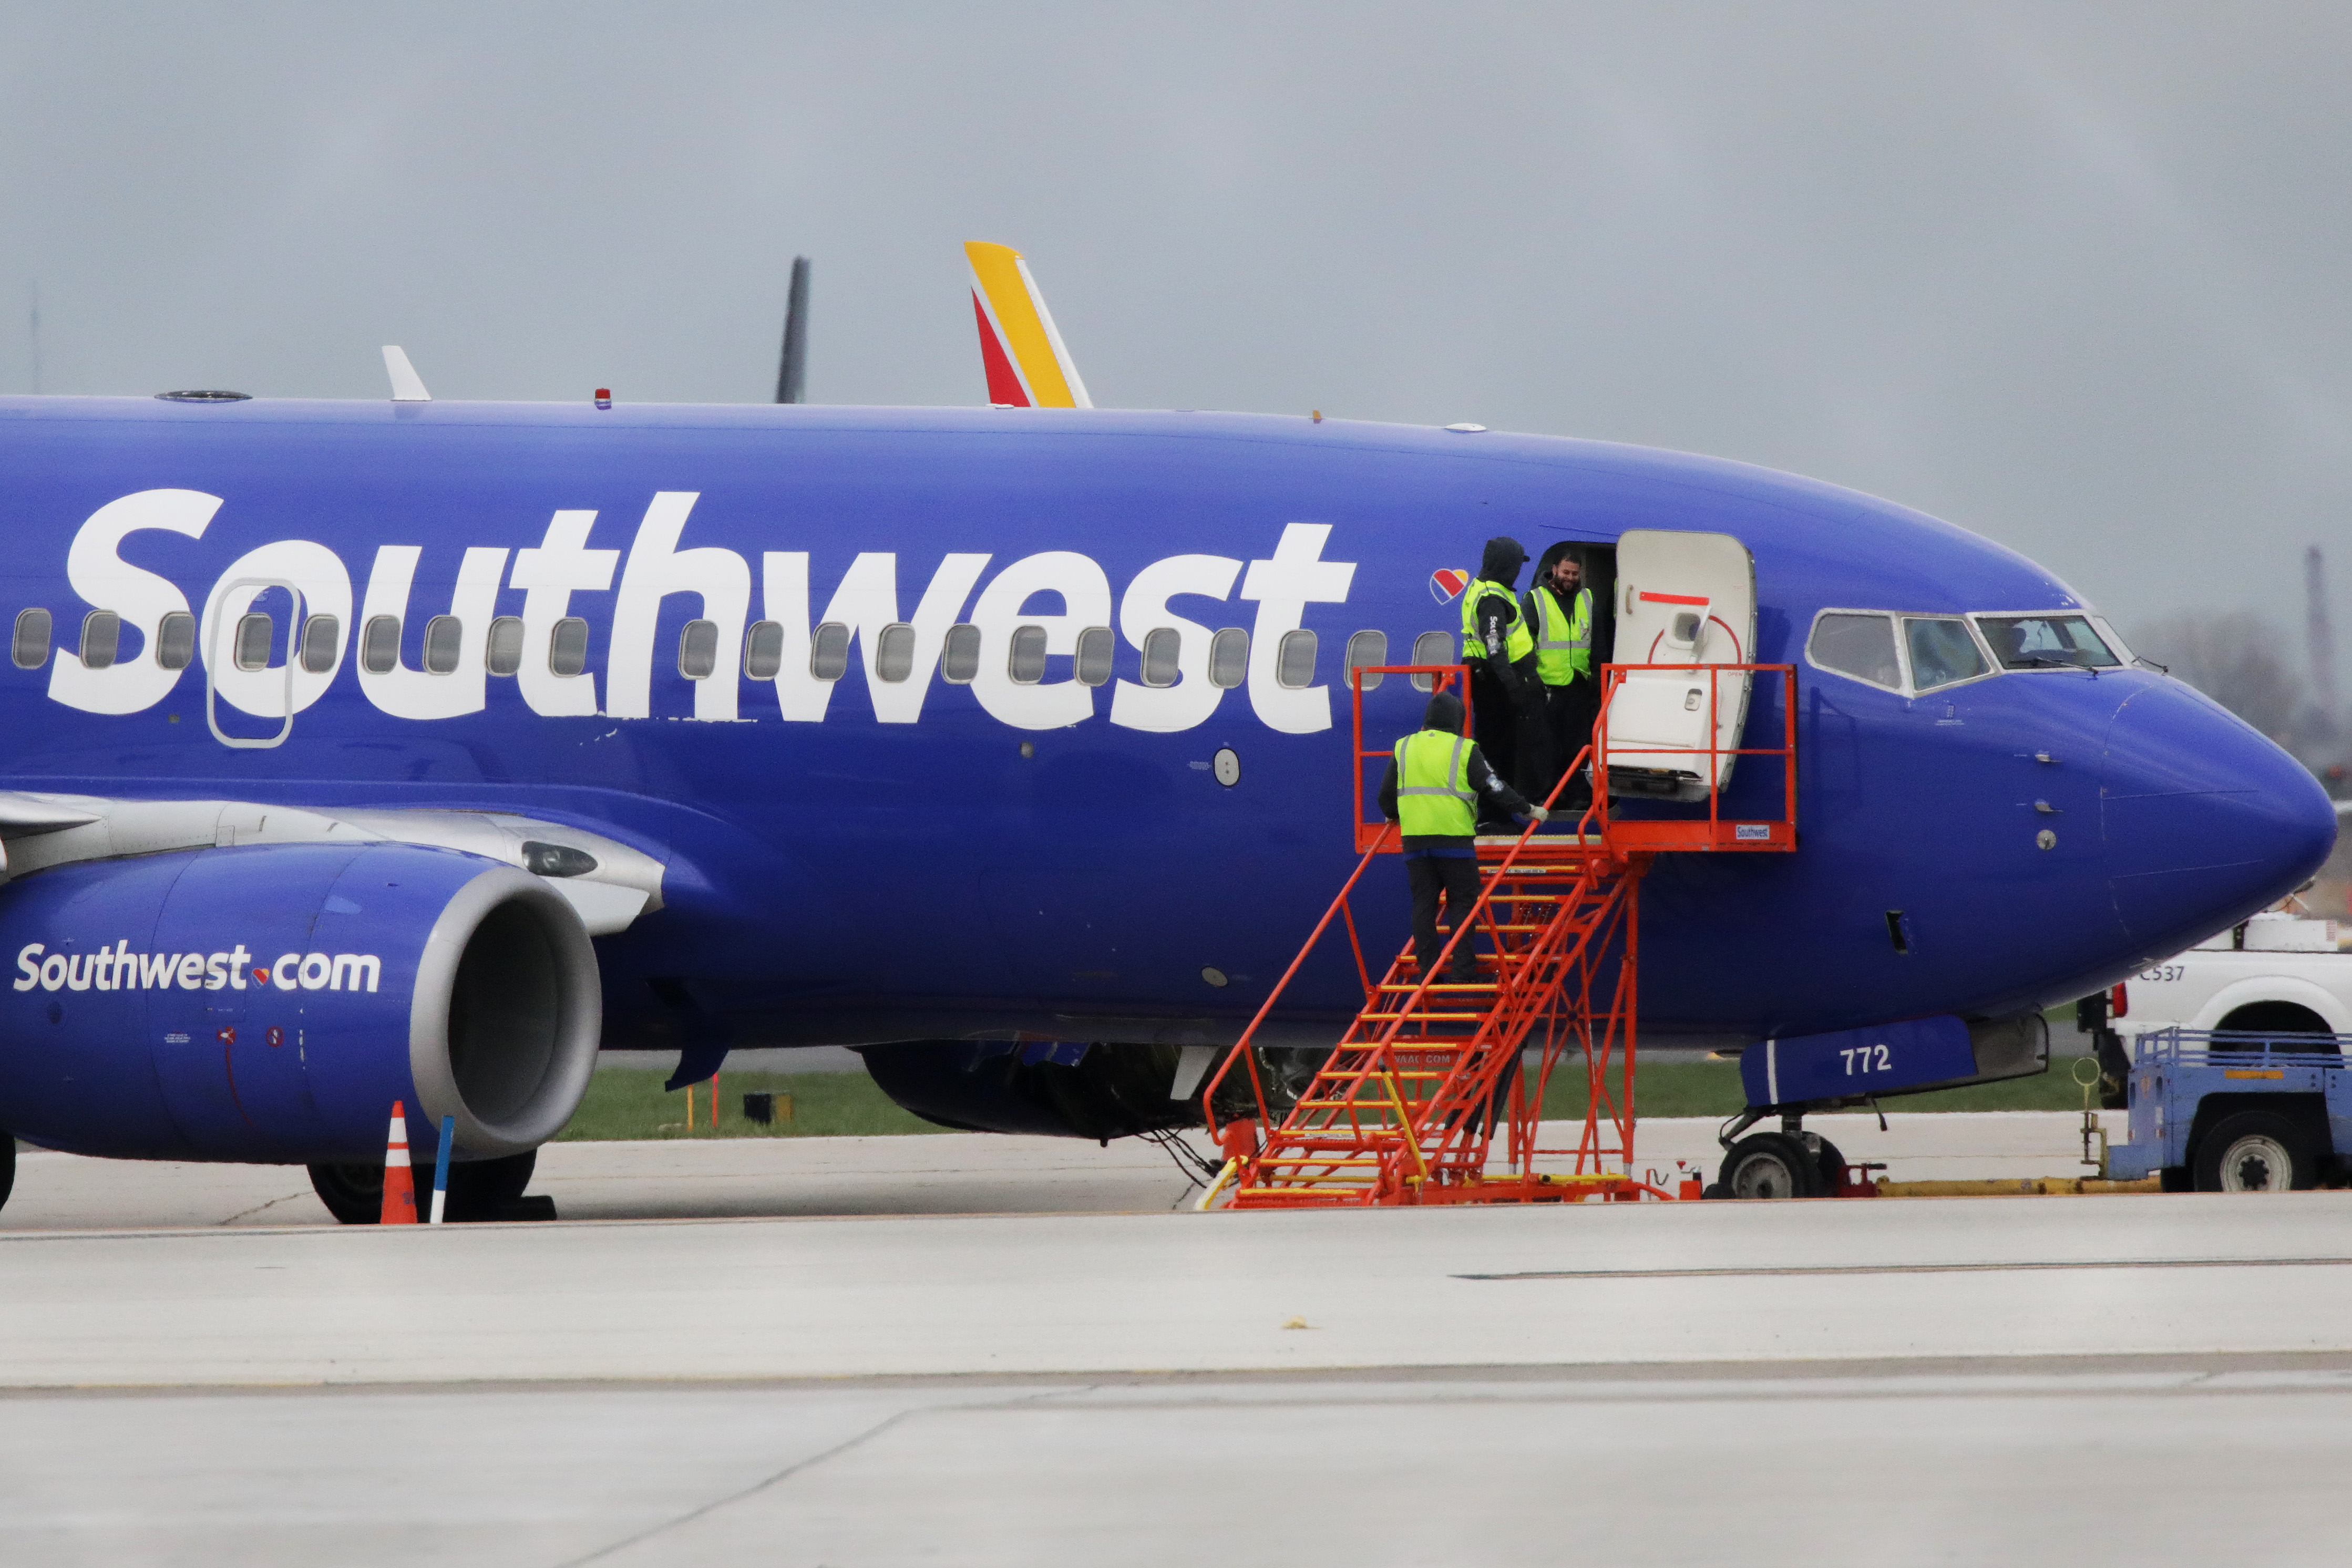 Southwest Says Ticket Sales Are Down After Last Week’s Fatal Engine Explosion